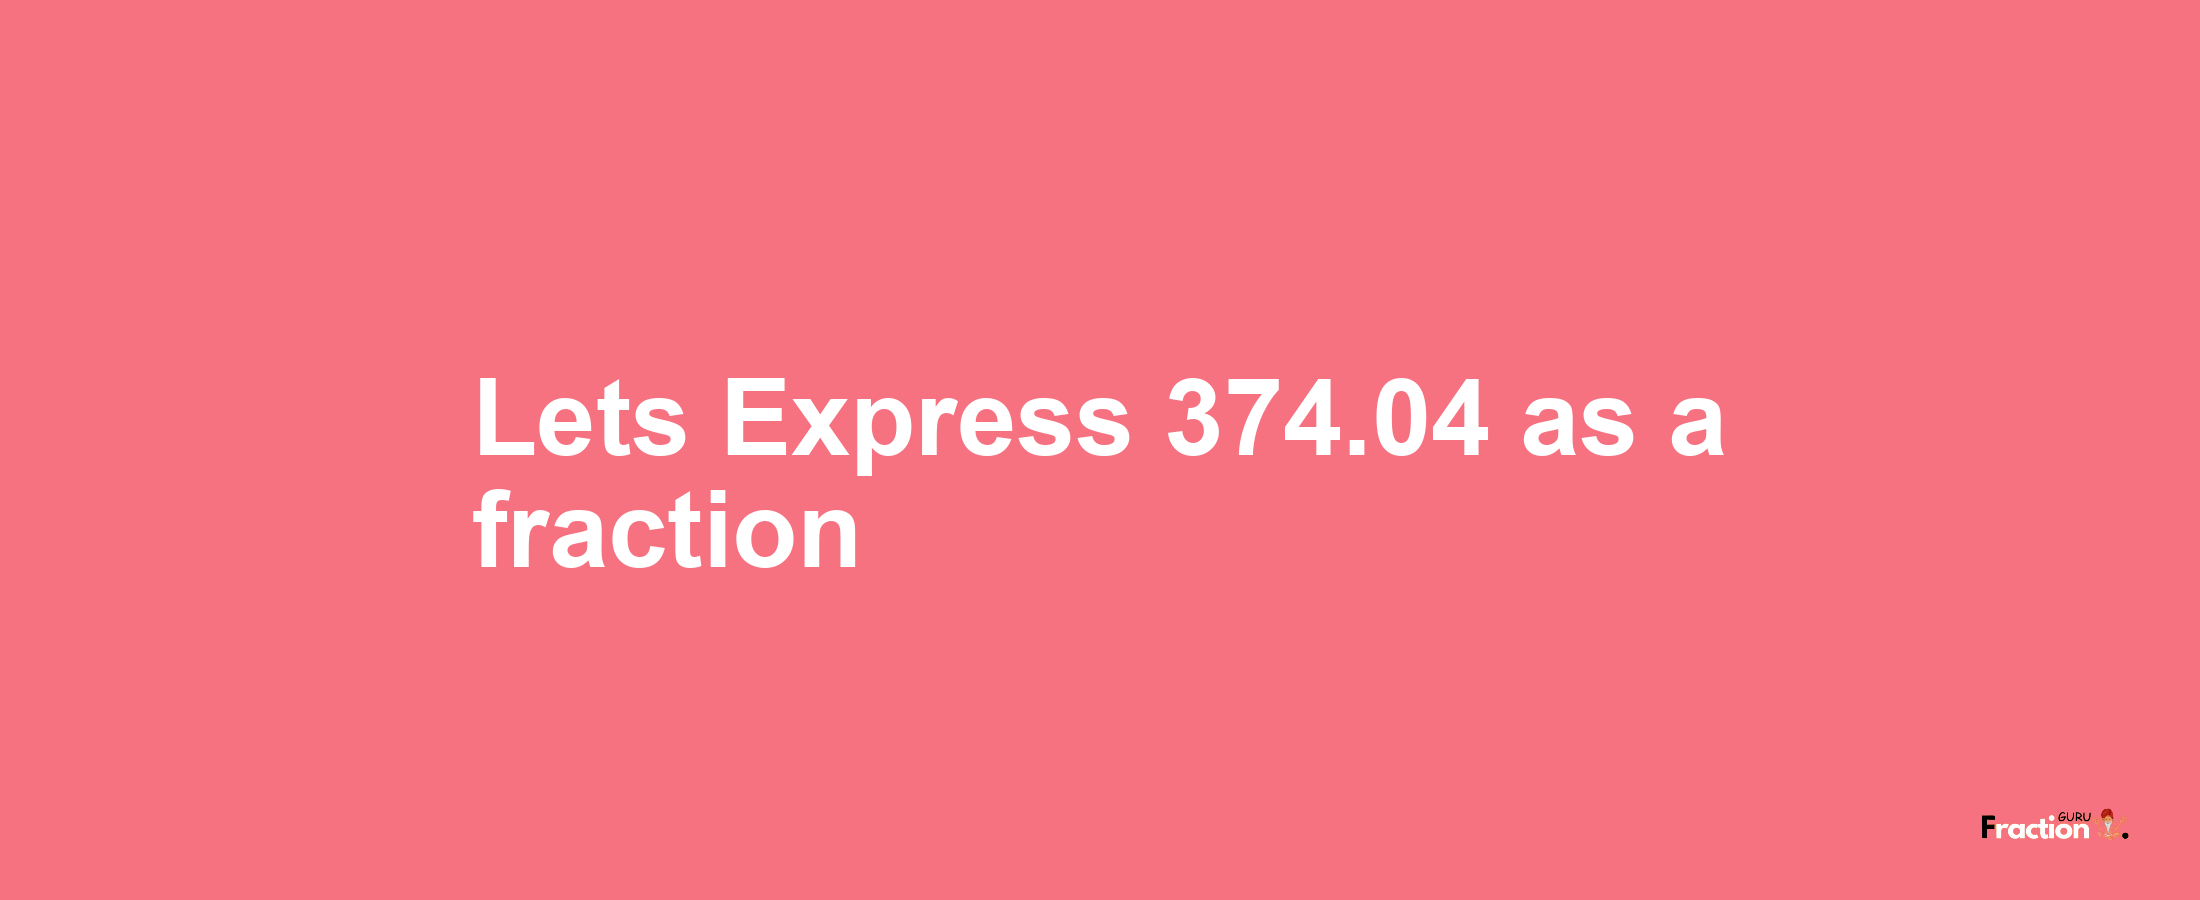 Lets Express 374.04 as afraction